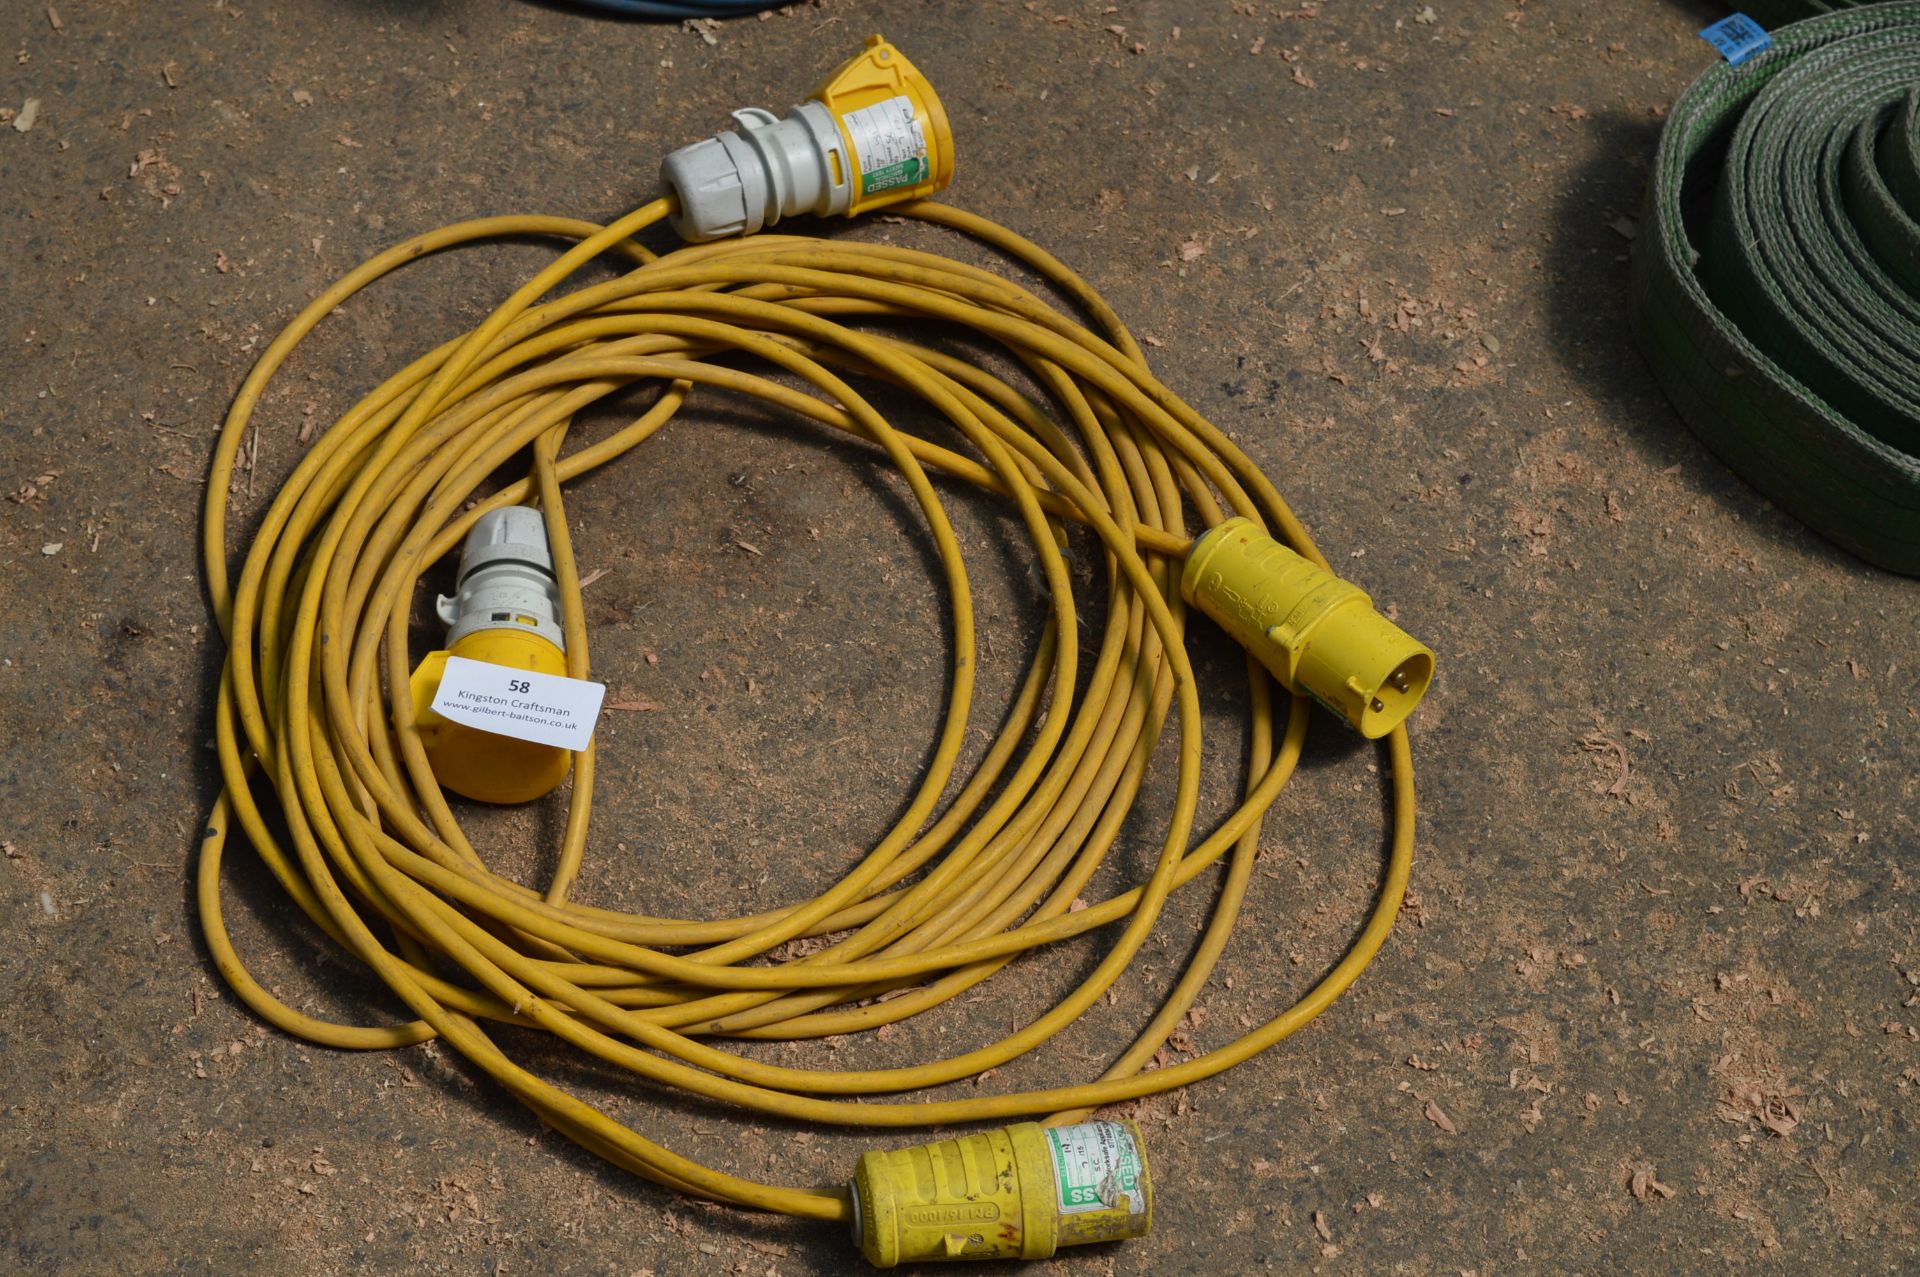 *Two 110V Extension Leads